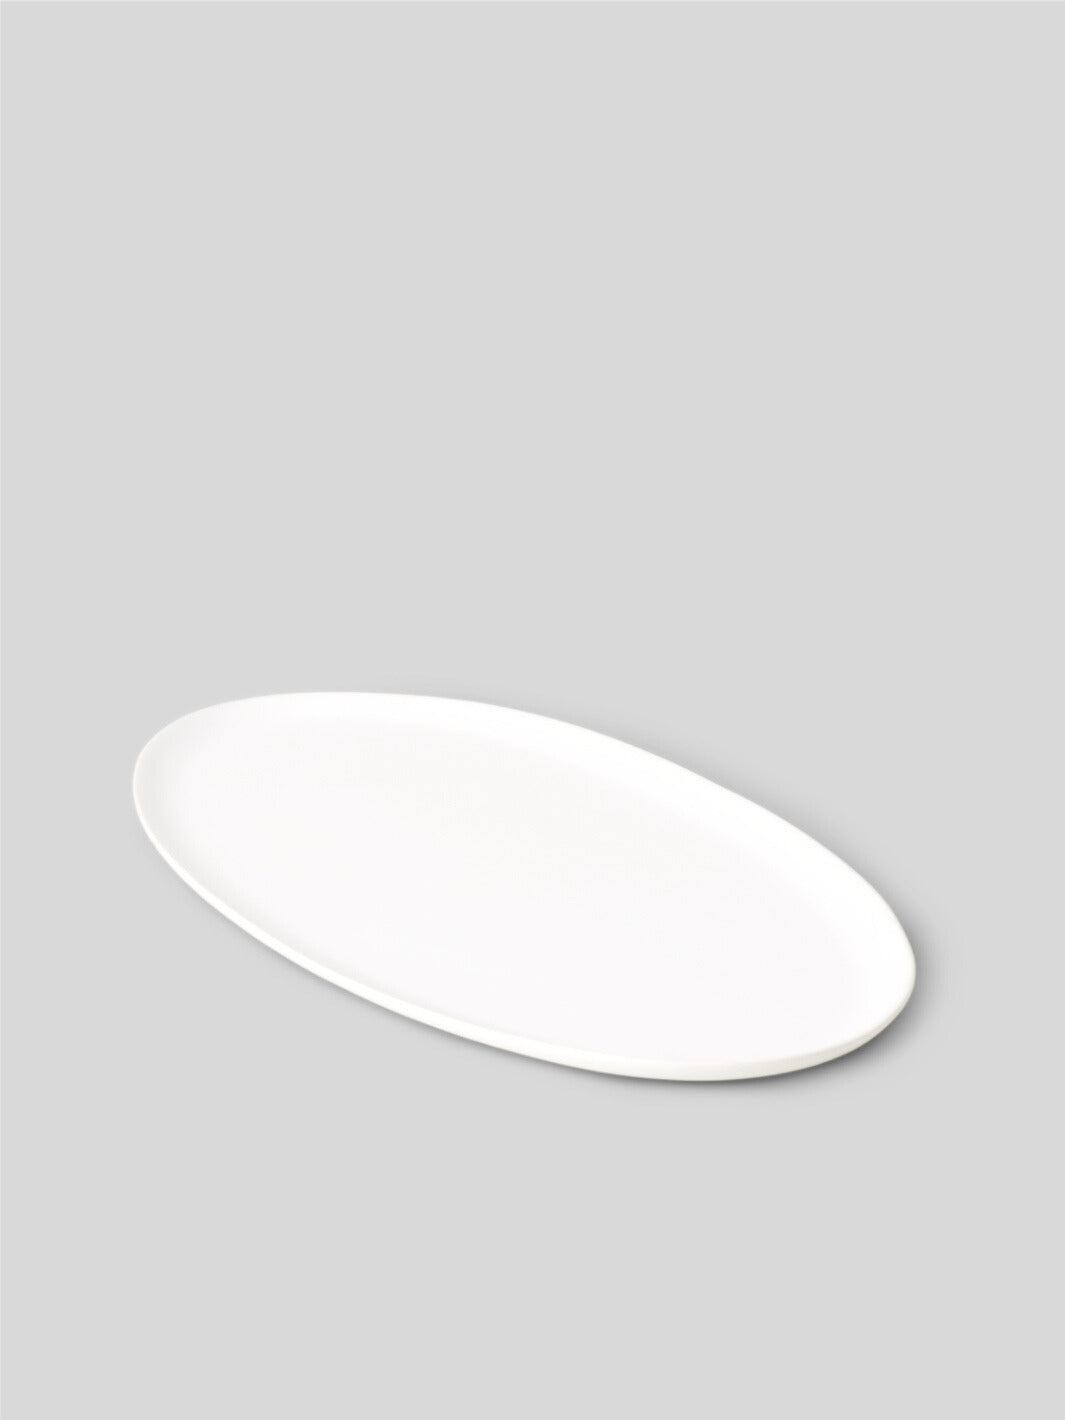 FABLE The Oval Serving Platter / Plates